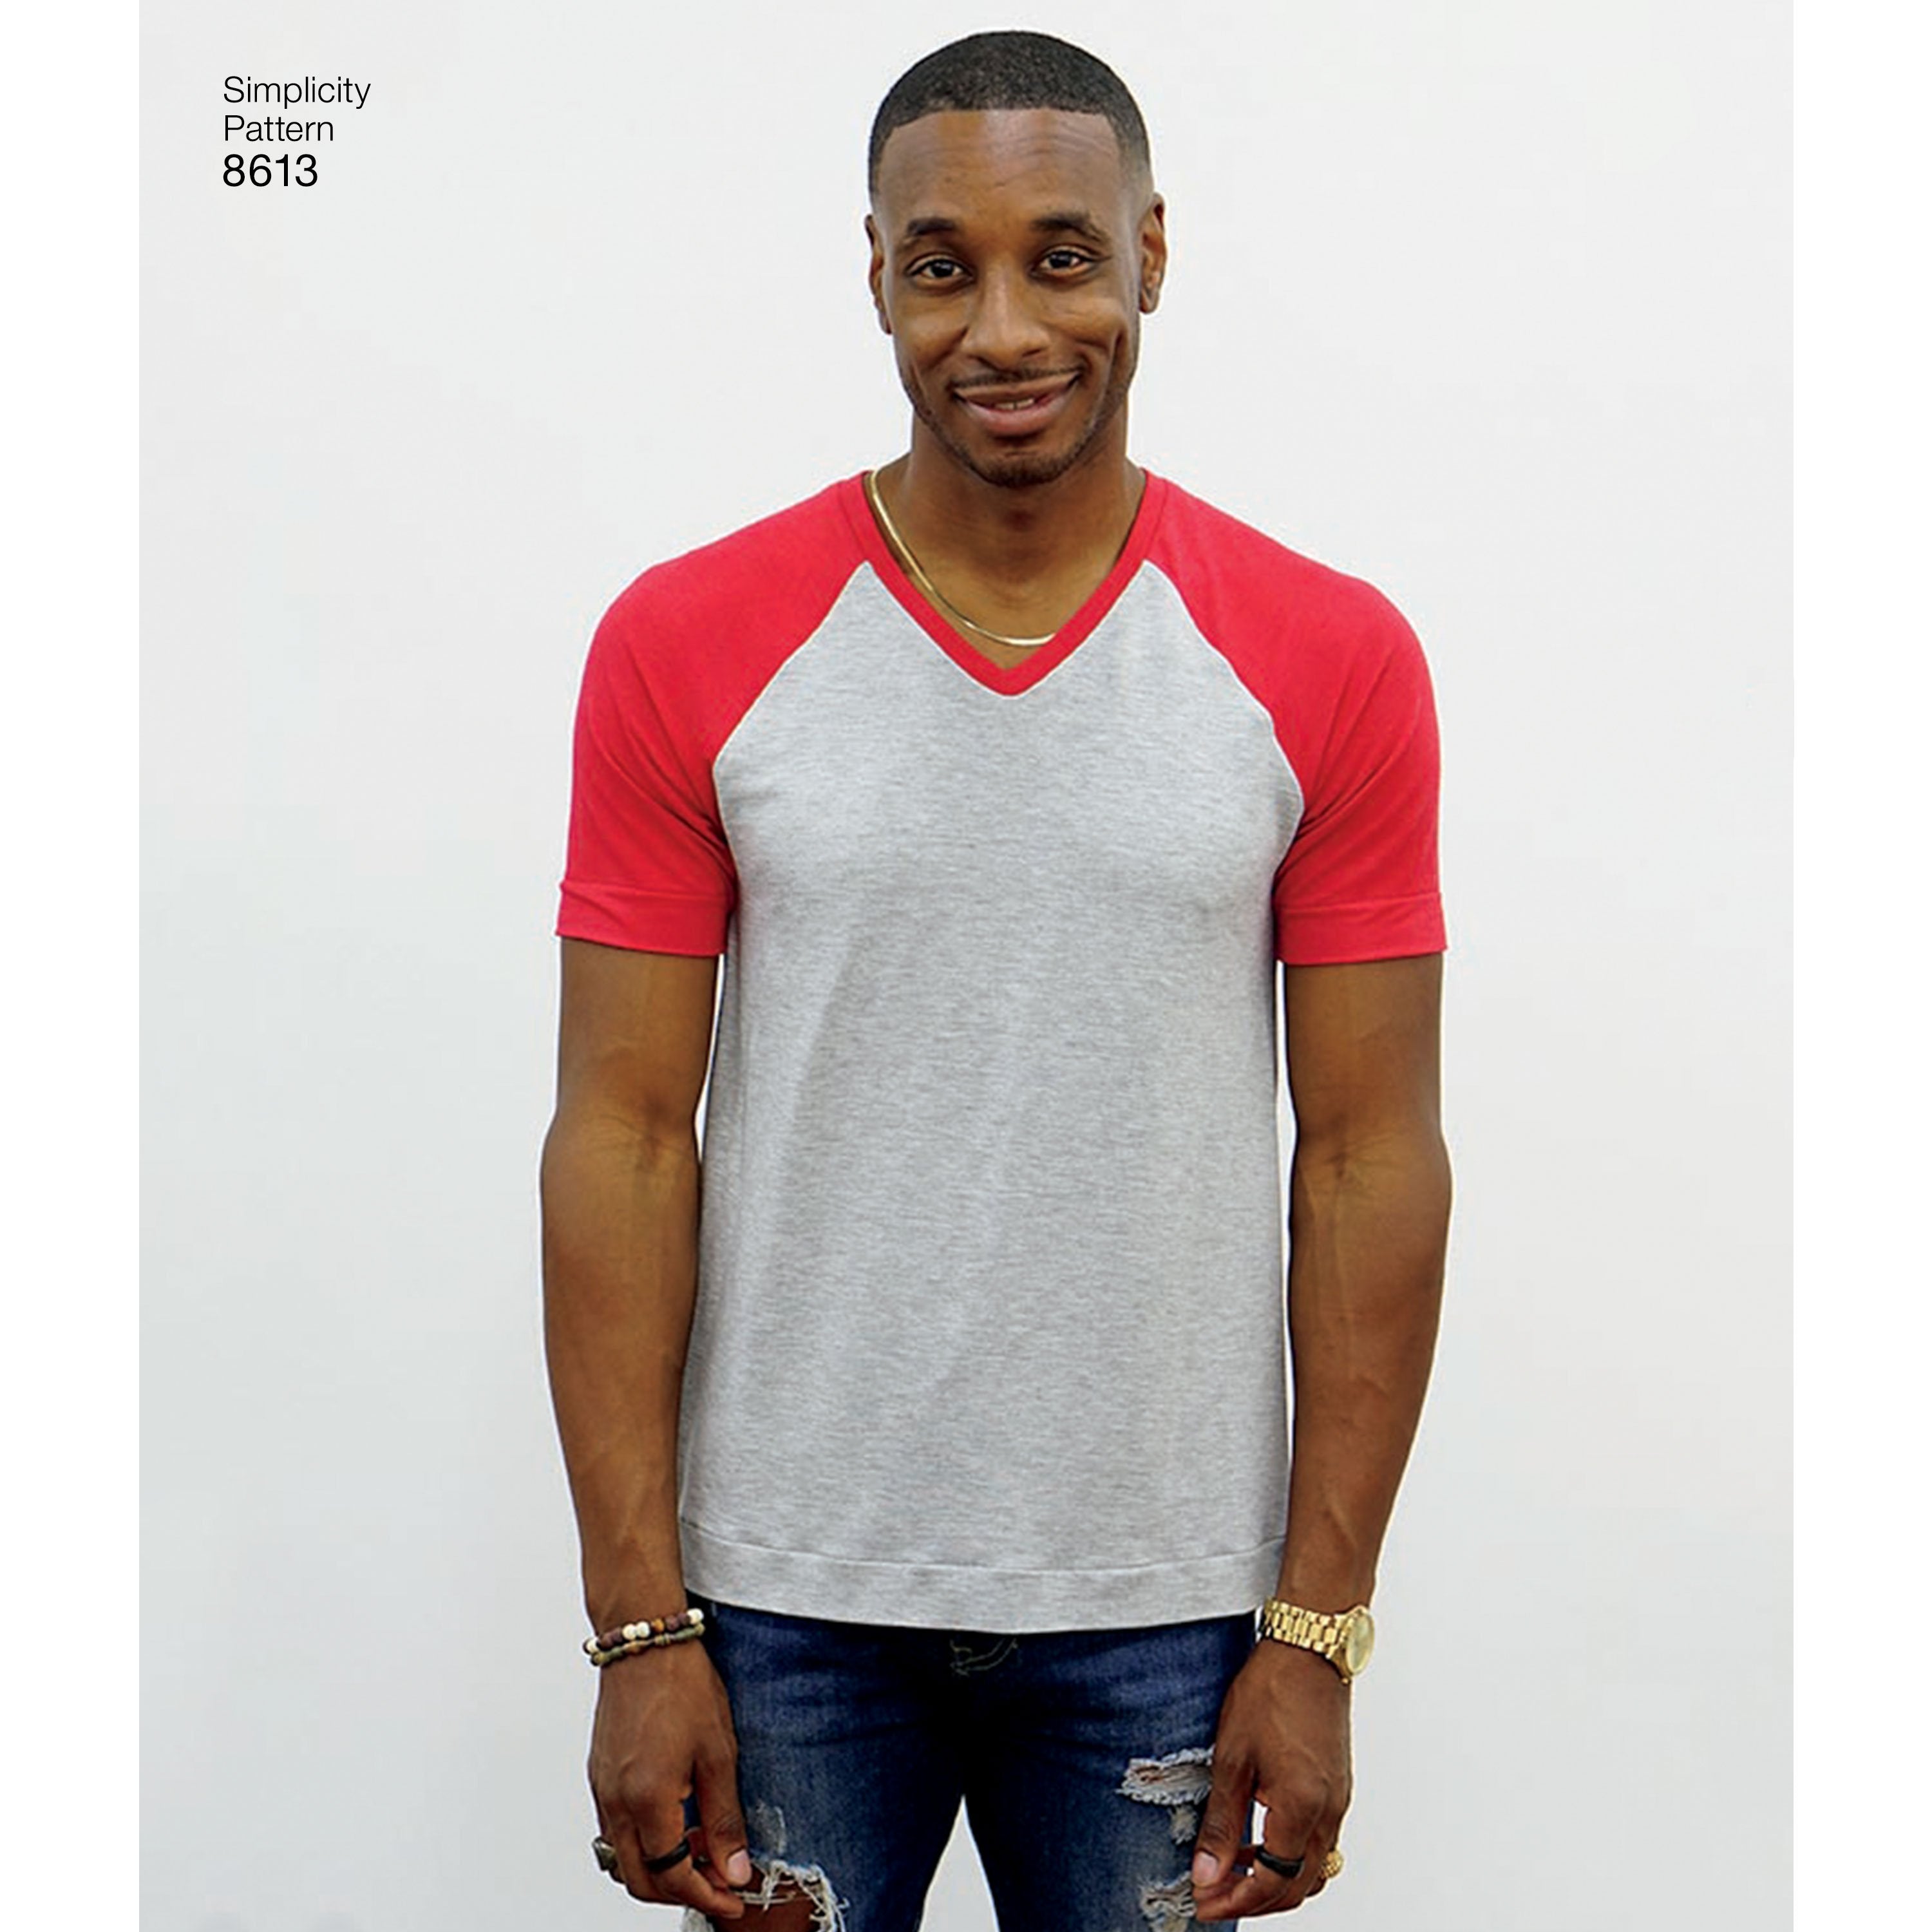 Simplicity Pattern 8613 Mens Top from Jaycotts Sewing Supplies